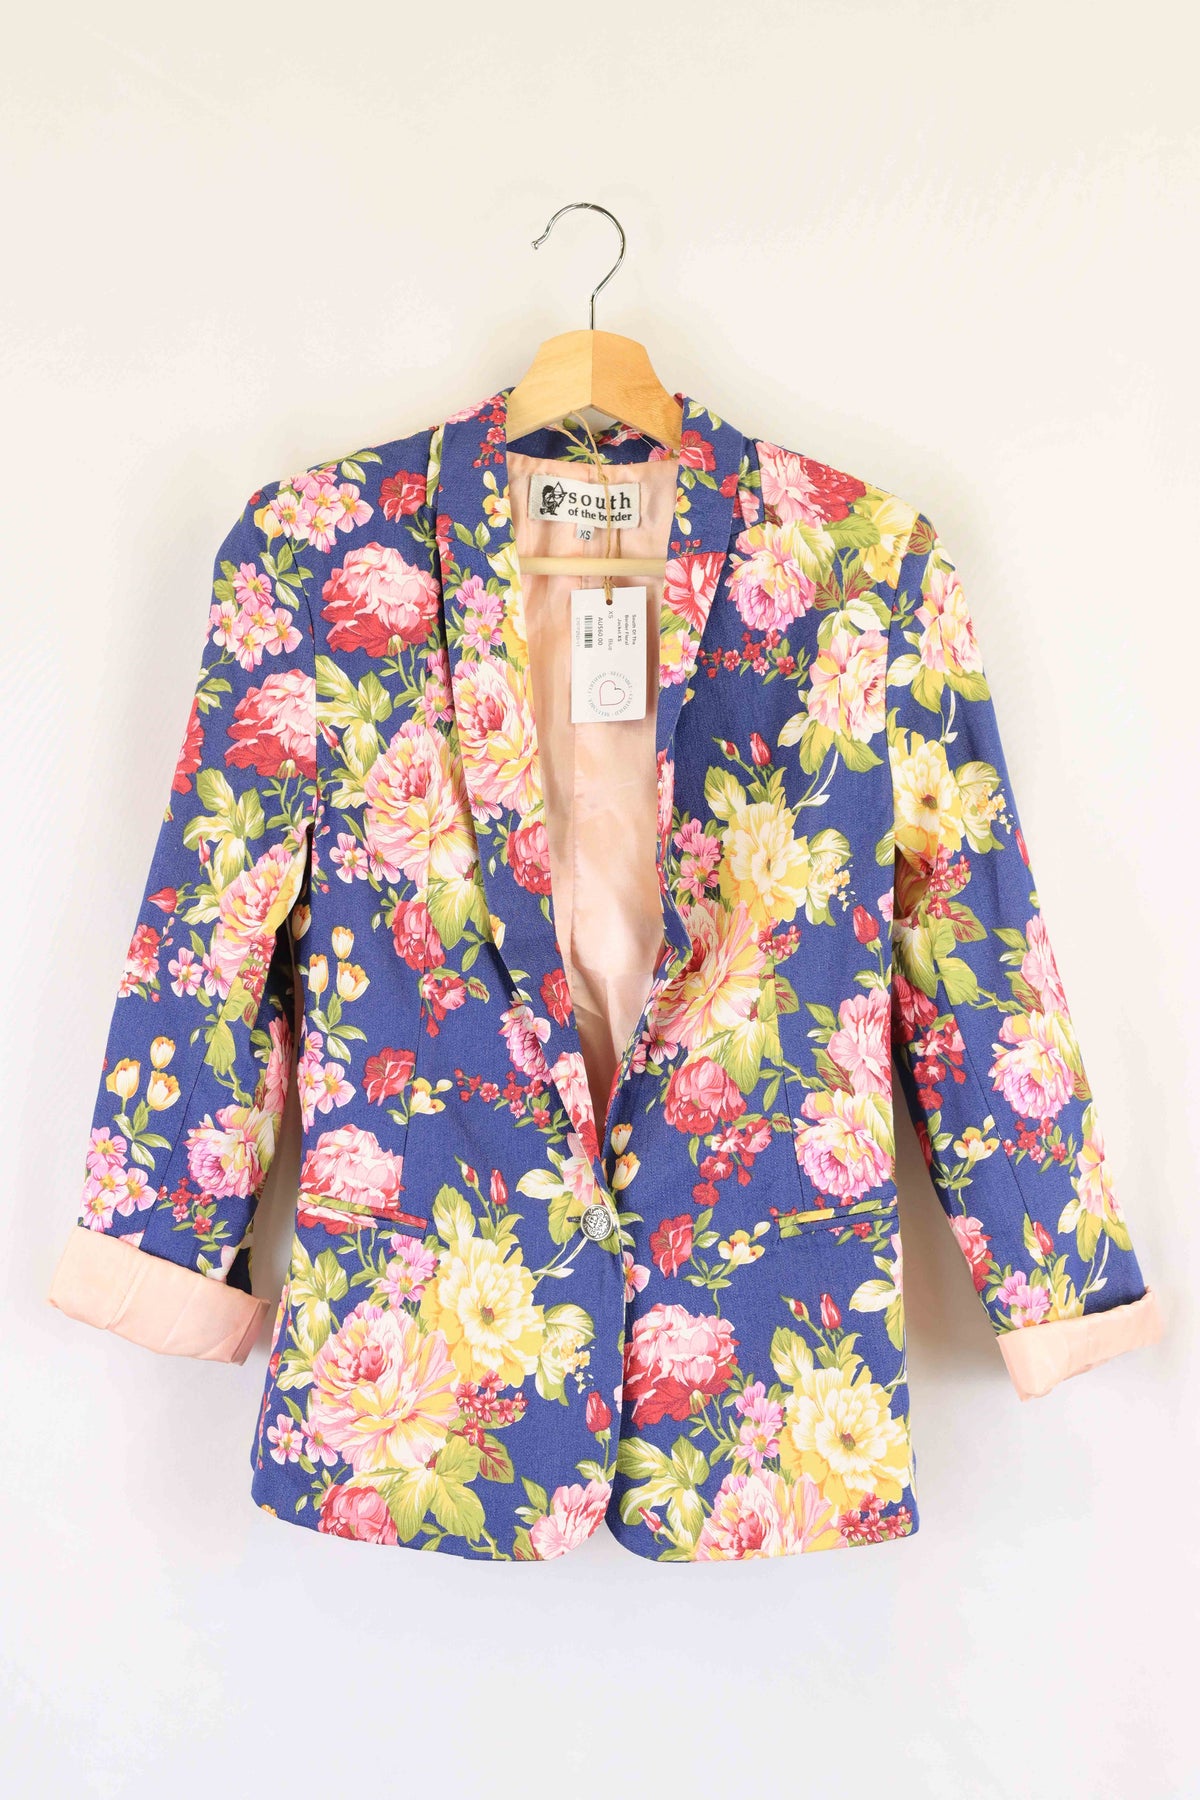 South Of The Border Floral Jacket XS